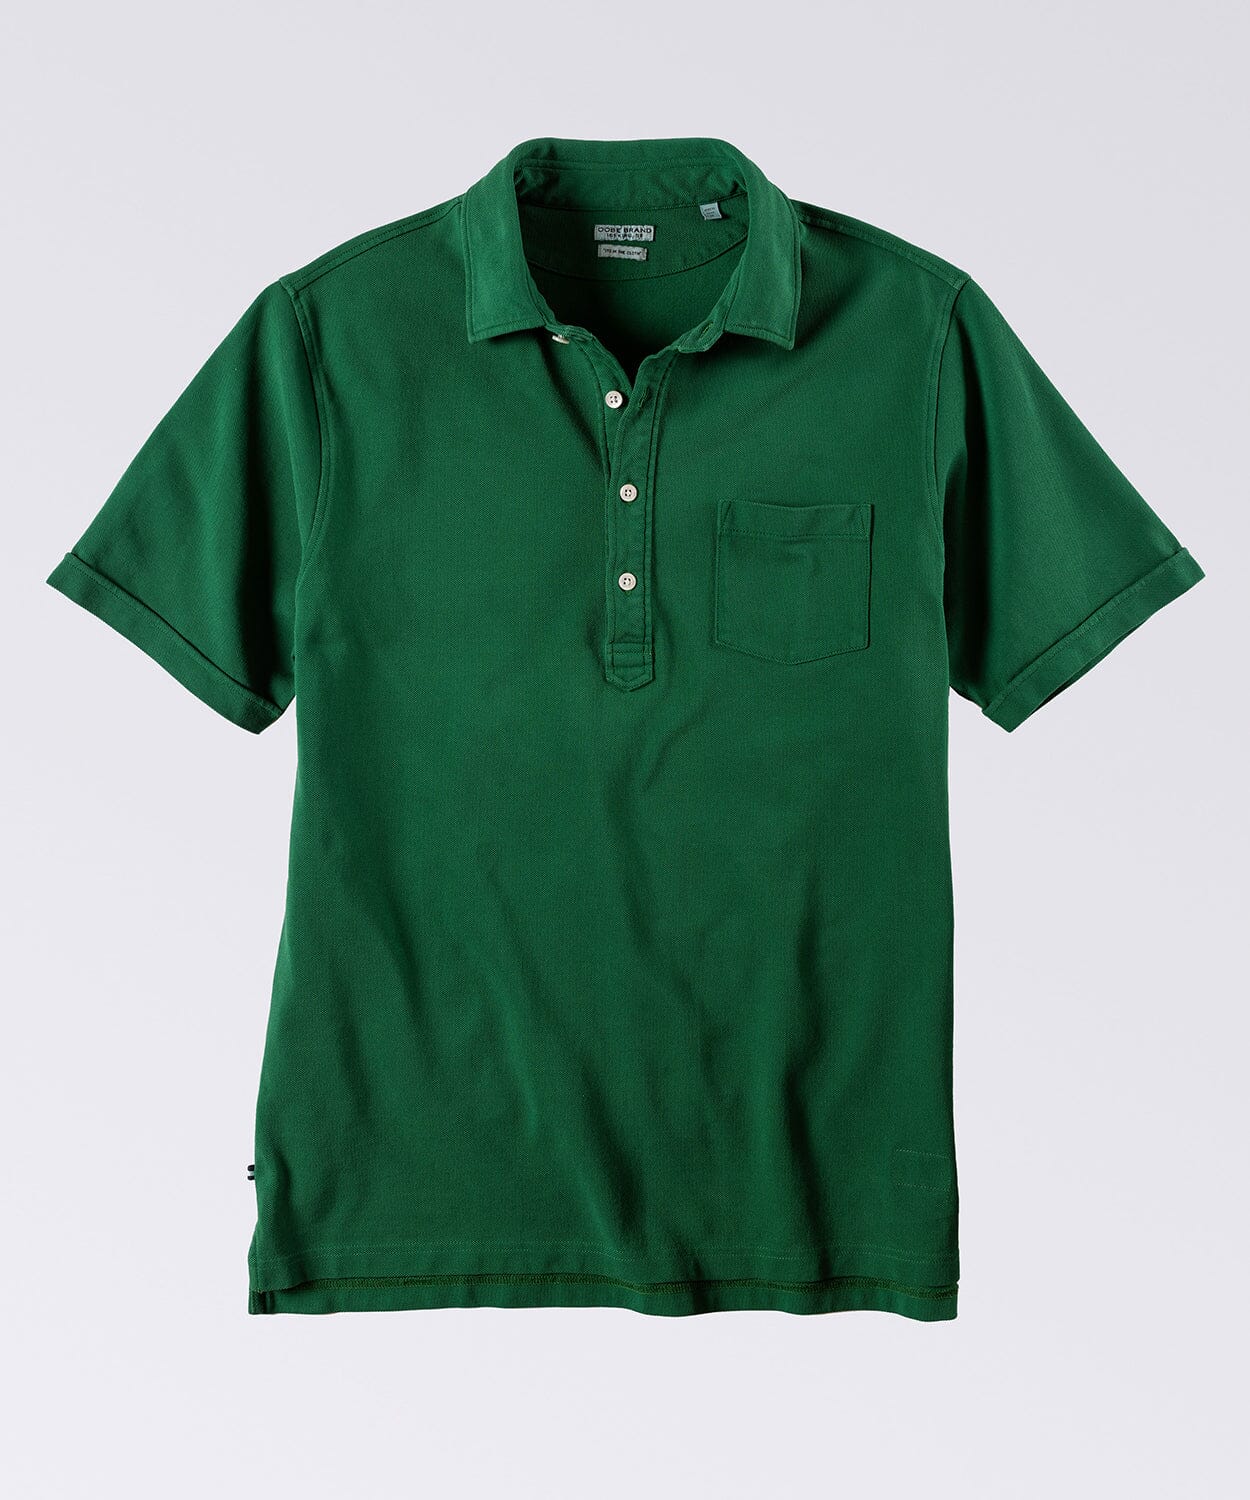 green mens polo shirt by oobe brand